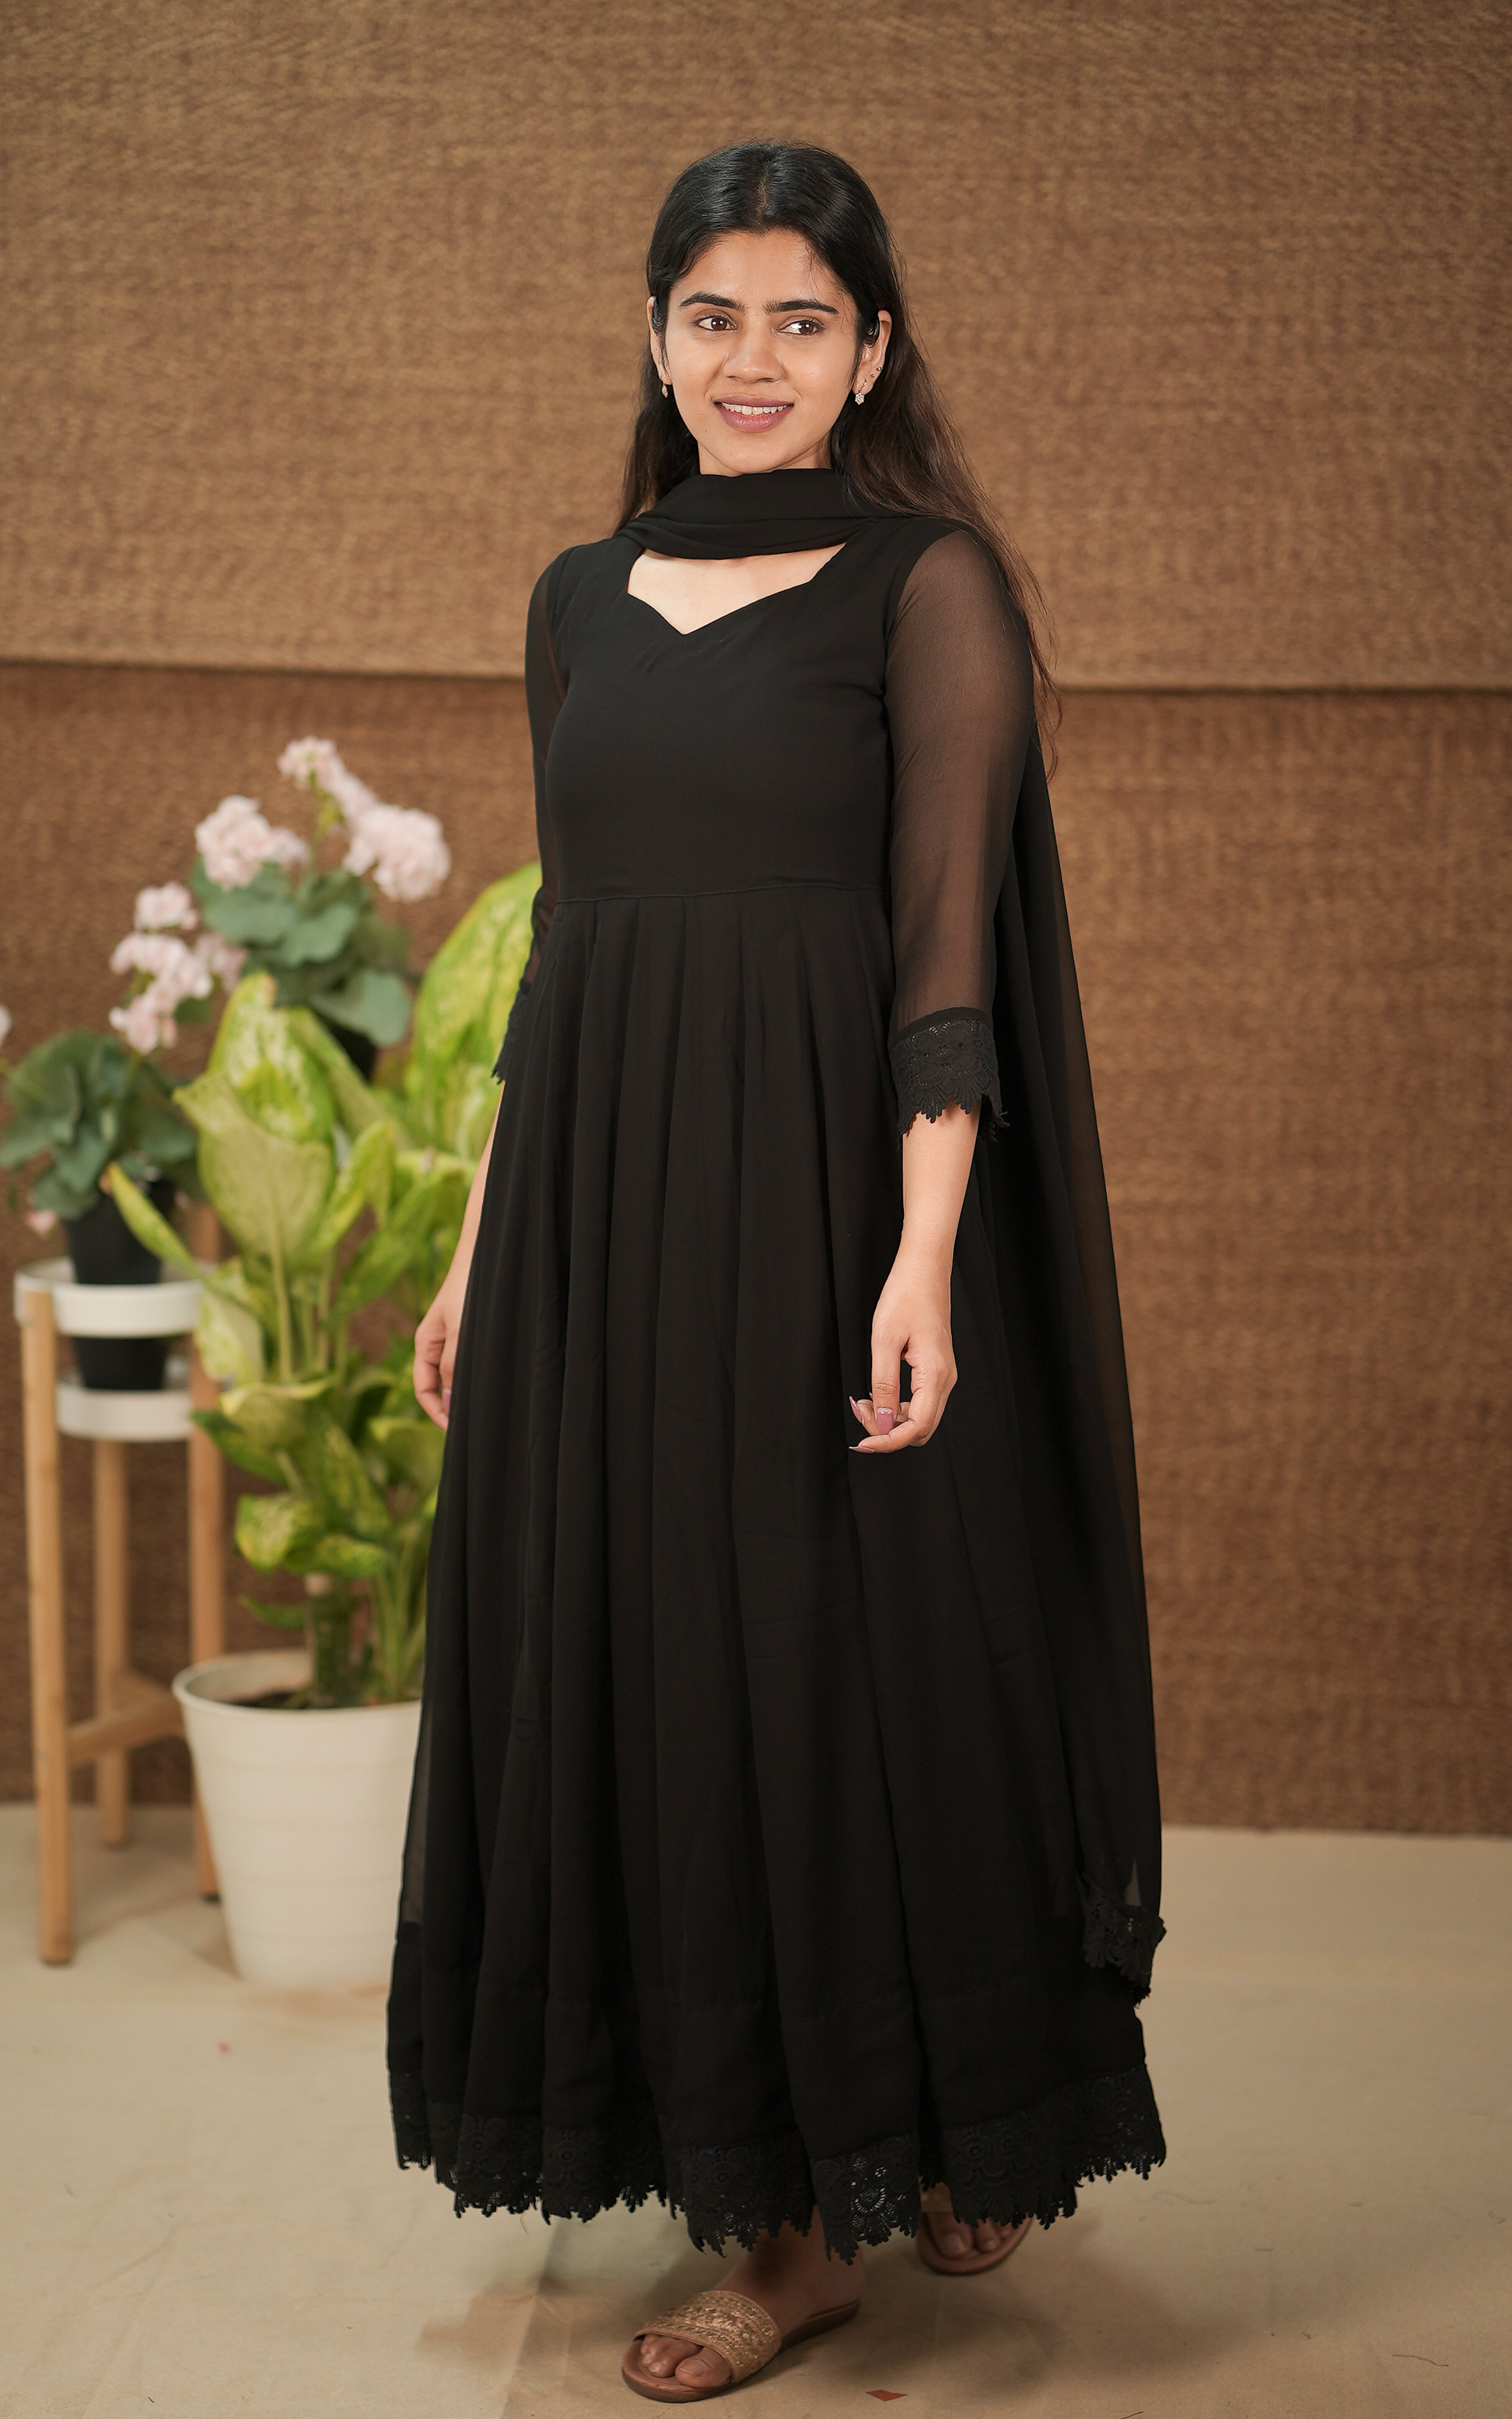 instore kurti set georgette with butter crepe lining full flared anarkali with crochet lace border color: black